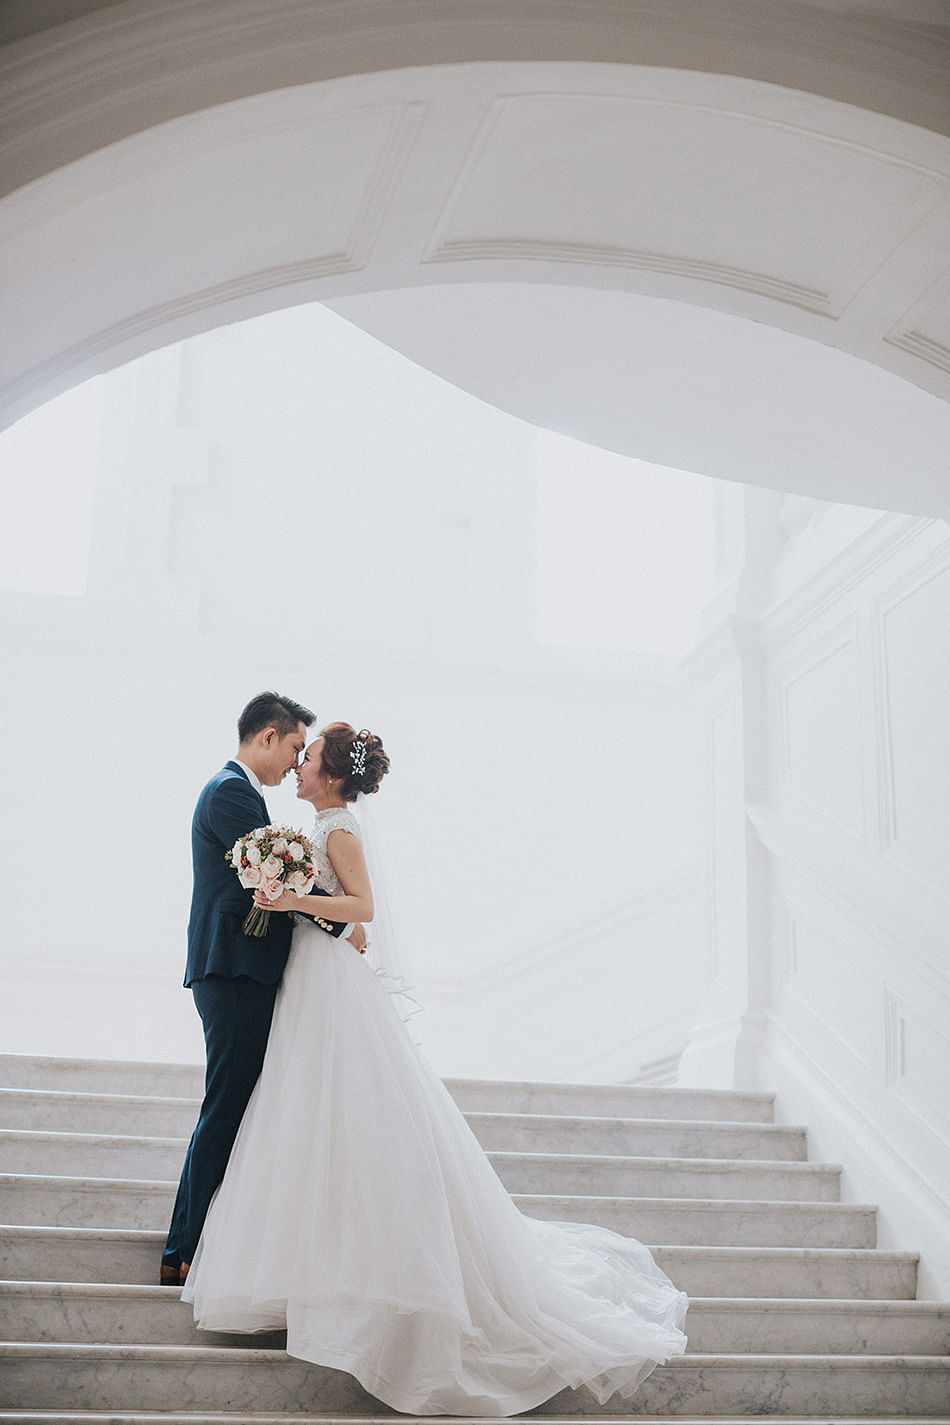 6 great cost-free wedding ideas we love - Her World Singapore